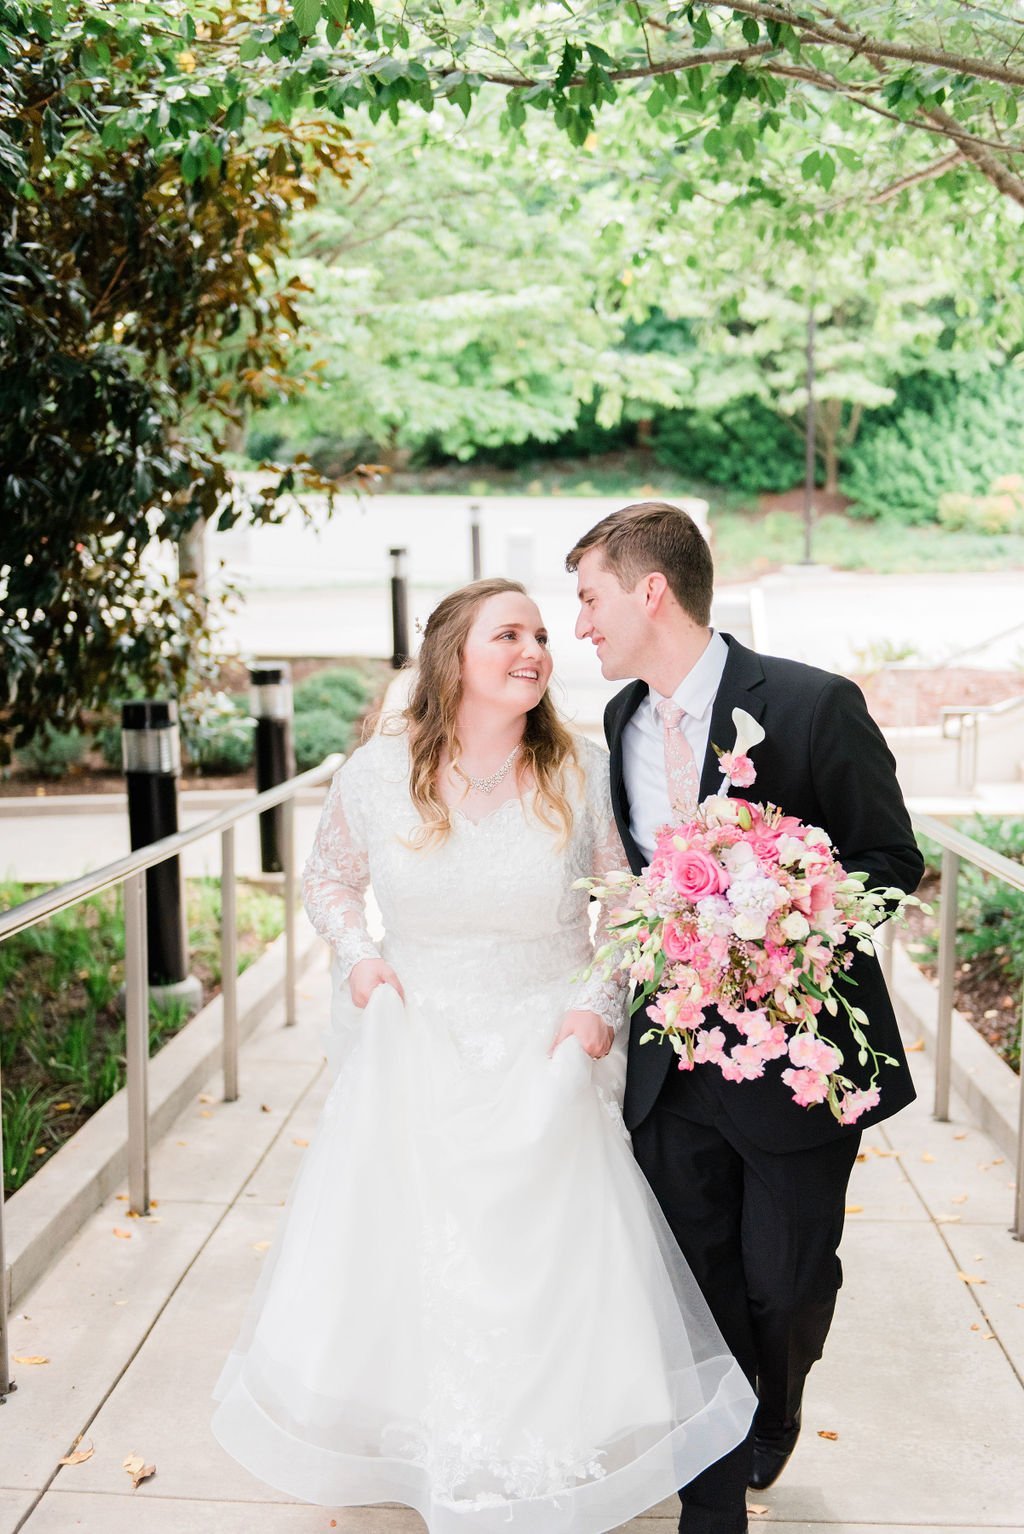  The look between this newlywed is one of pure love and joy and is captured by Georgia-based photographer Jacquie Erickson newlyweds walking photo temple grounds&nbsp; #jacquieericksonphotography #ldstemplewedding #atlantageorgiaweddings #jacquieeric